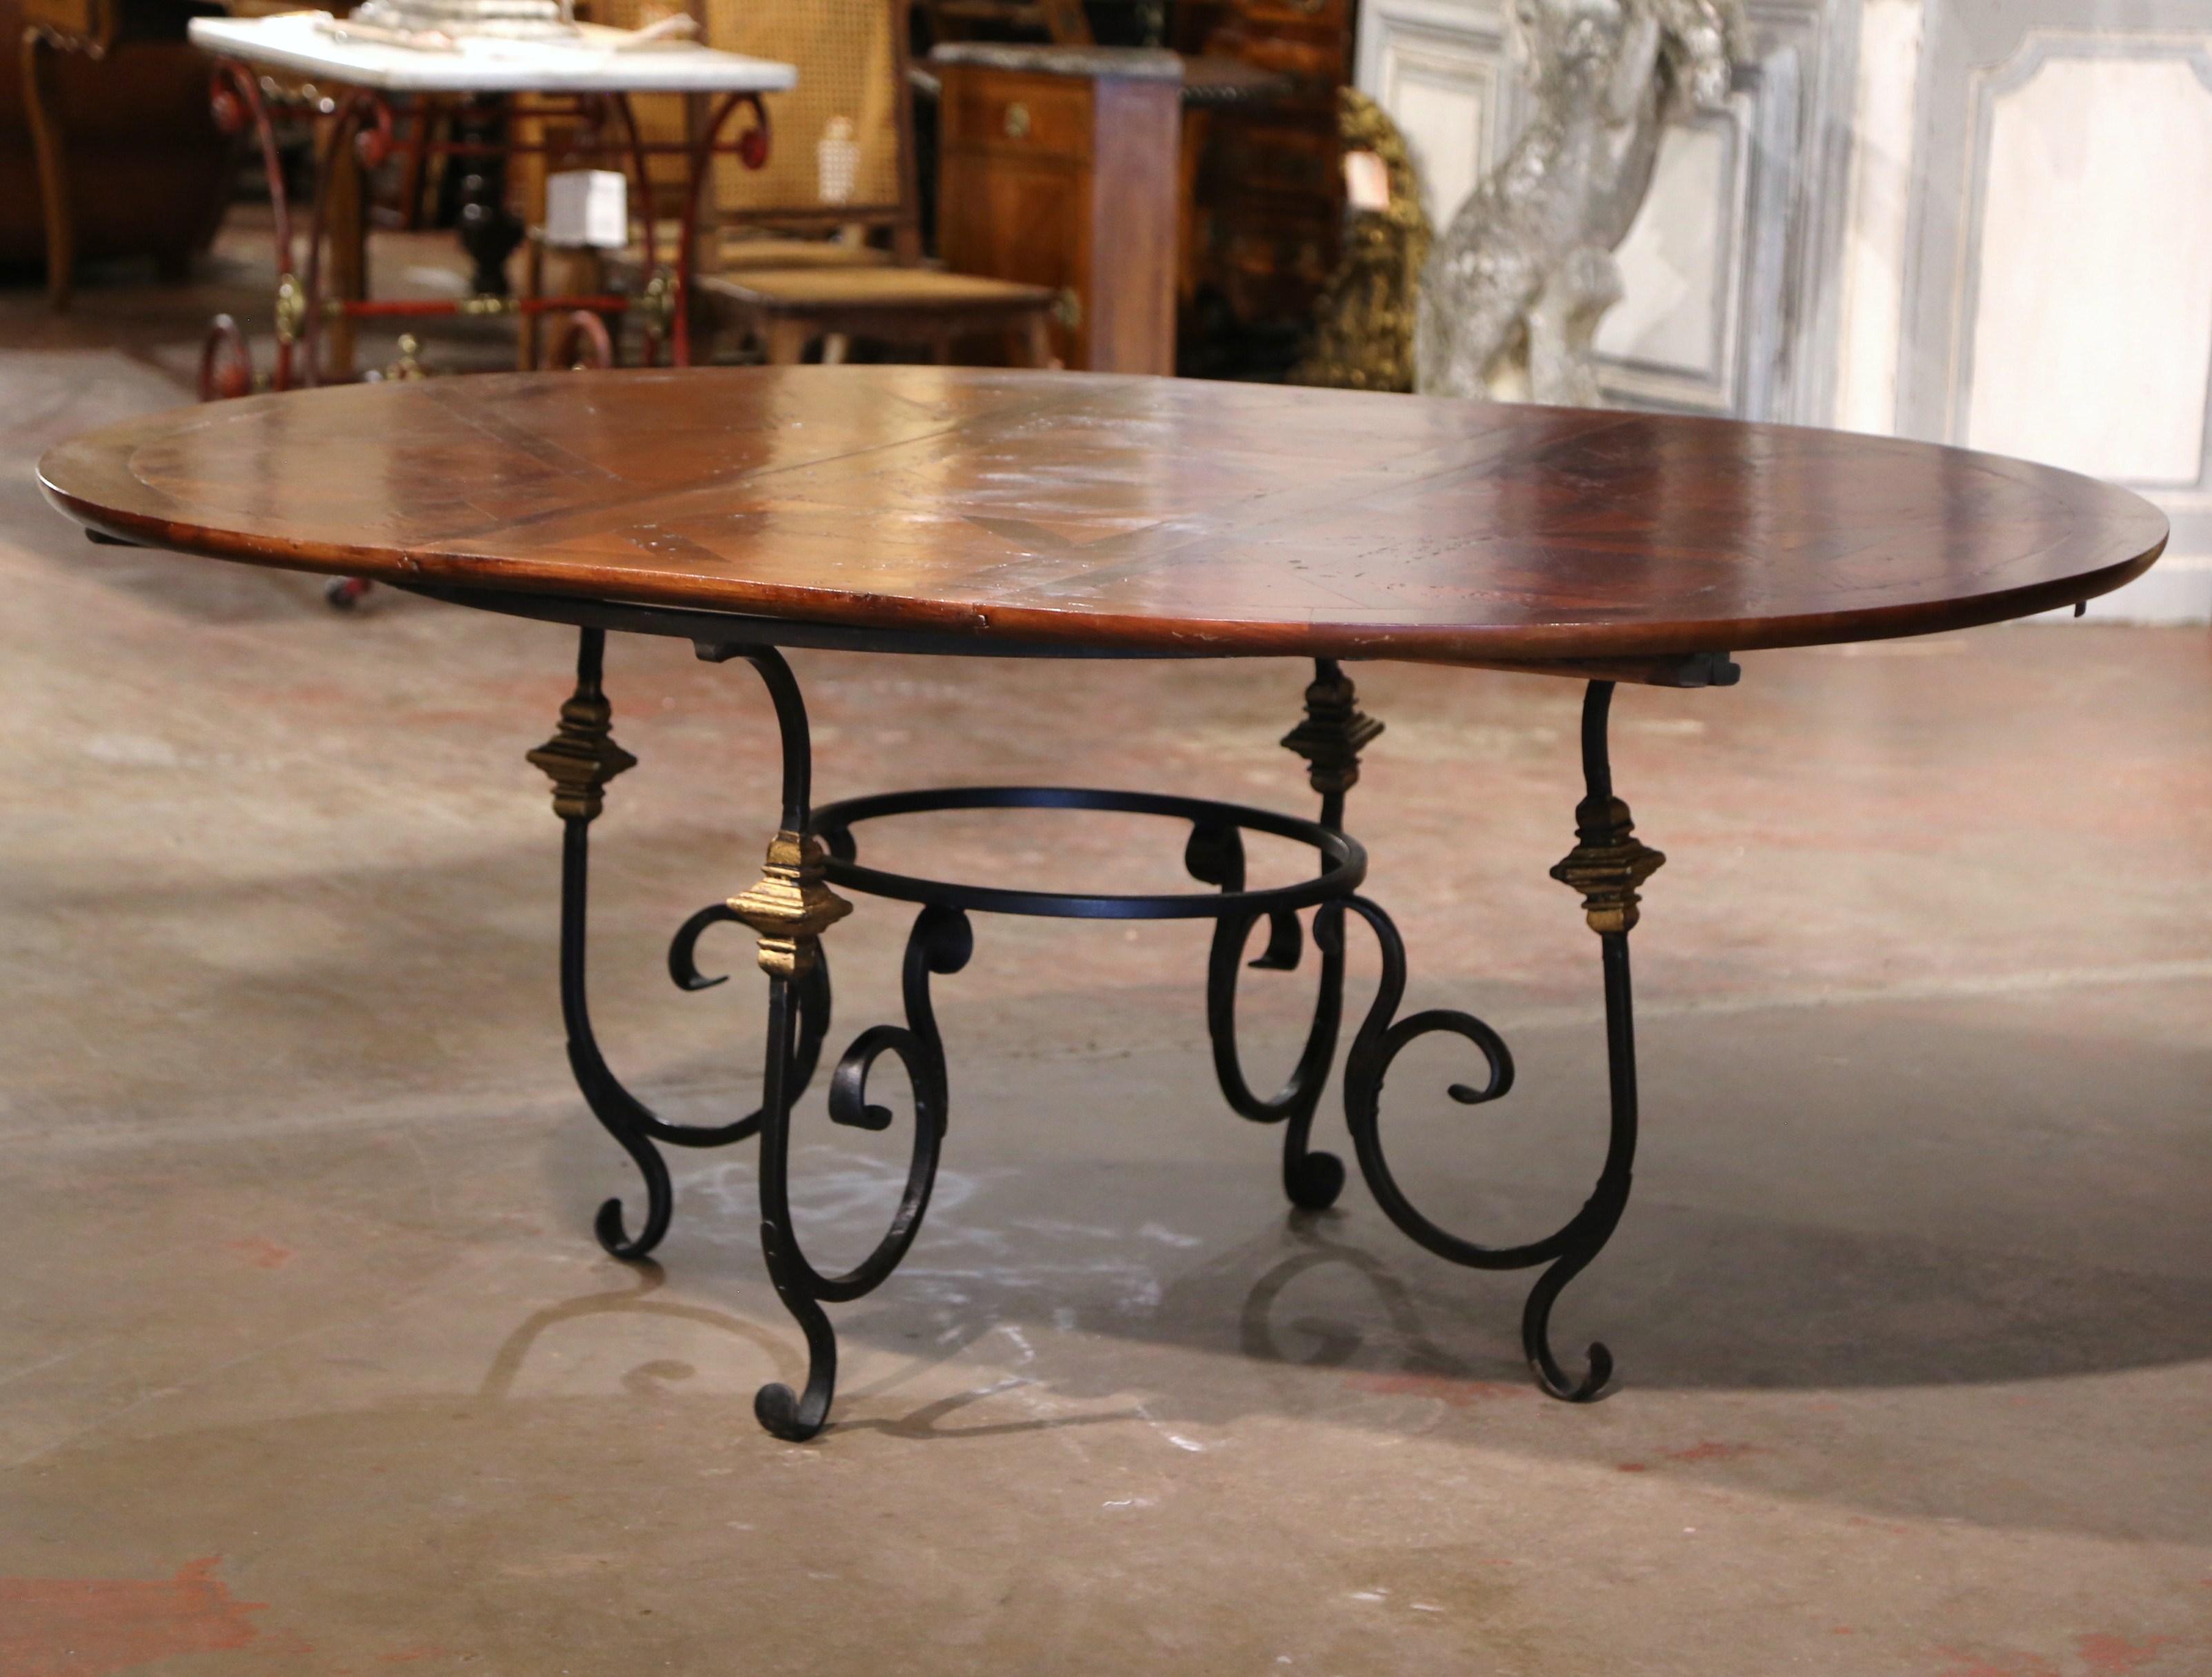 Crafted in Lyon, France circa 1950, the walnut table stands on forged wrought iron base with elegant scrolled legs and connected with a round stretcher. The circular walnut top showcases old timber planks set in a parquet geometric pattern. The top